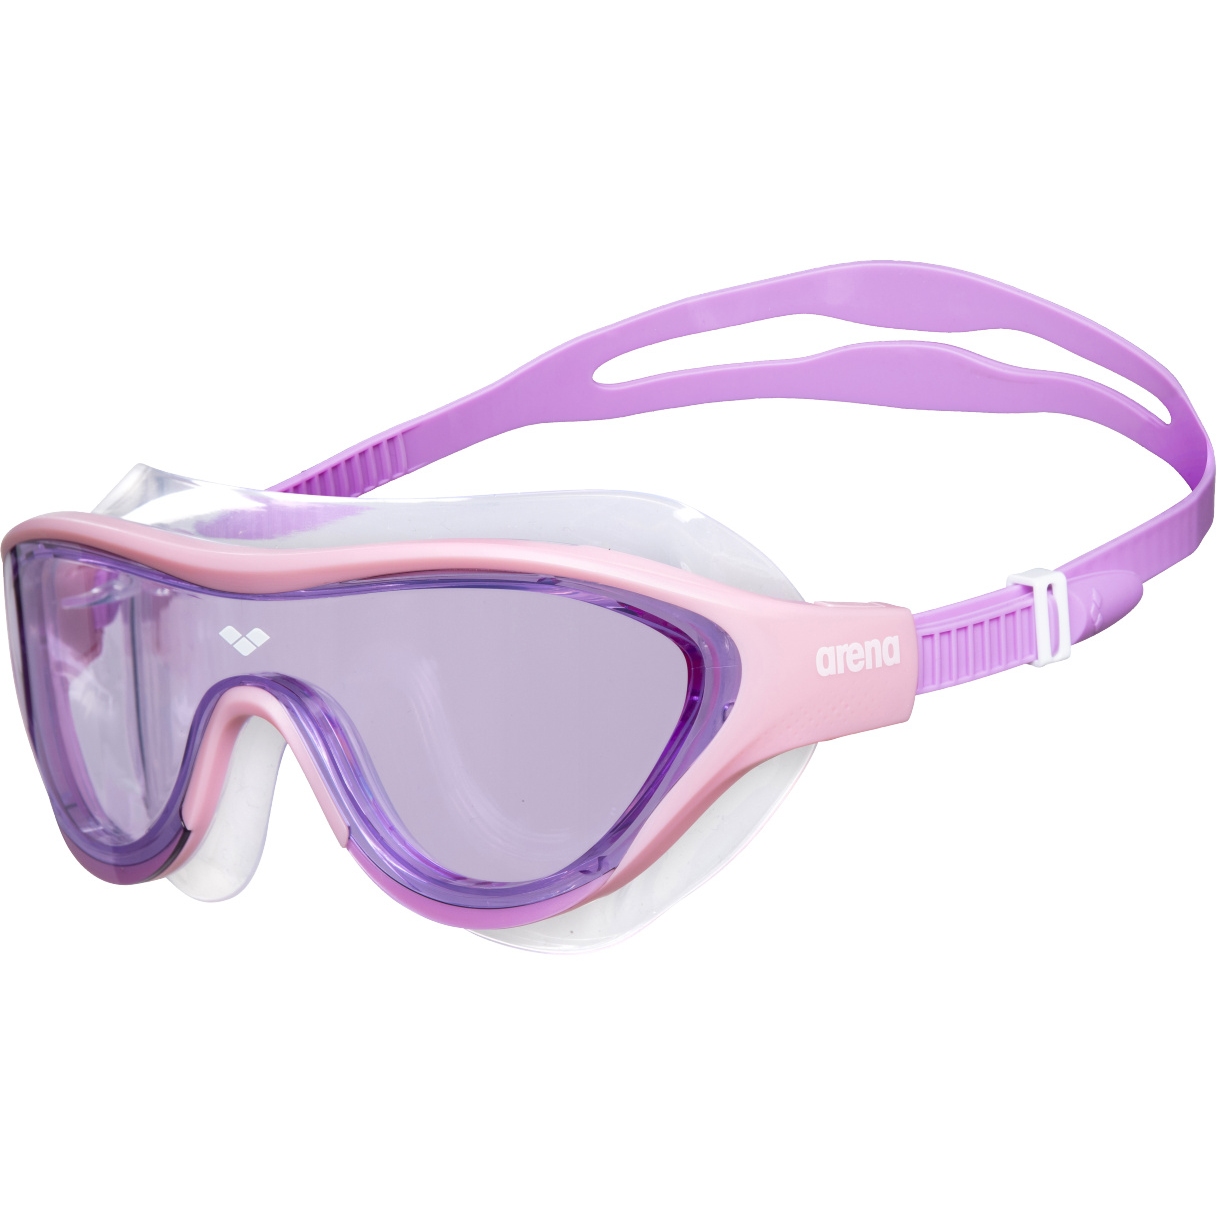 Picture of arena The One Mask JR Junior Swimming Goggles - Pink-Pink-Violet